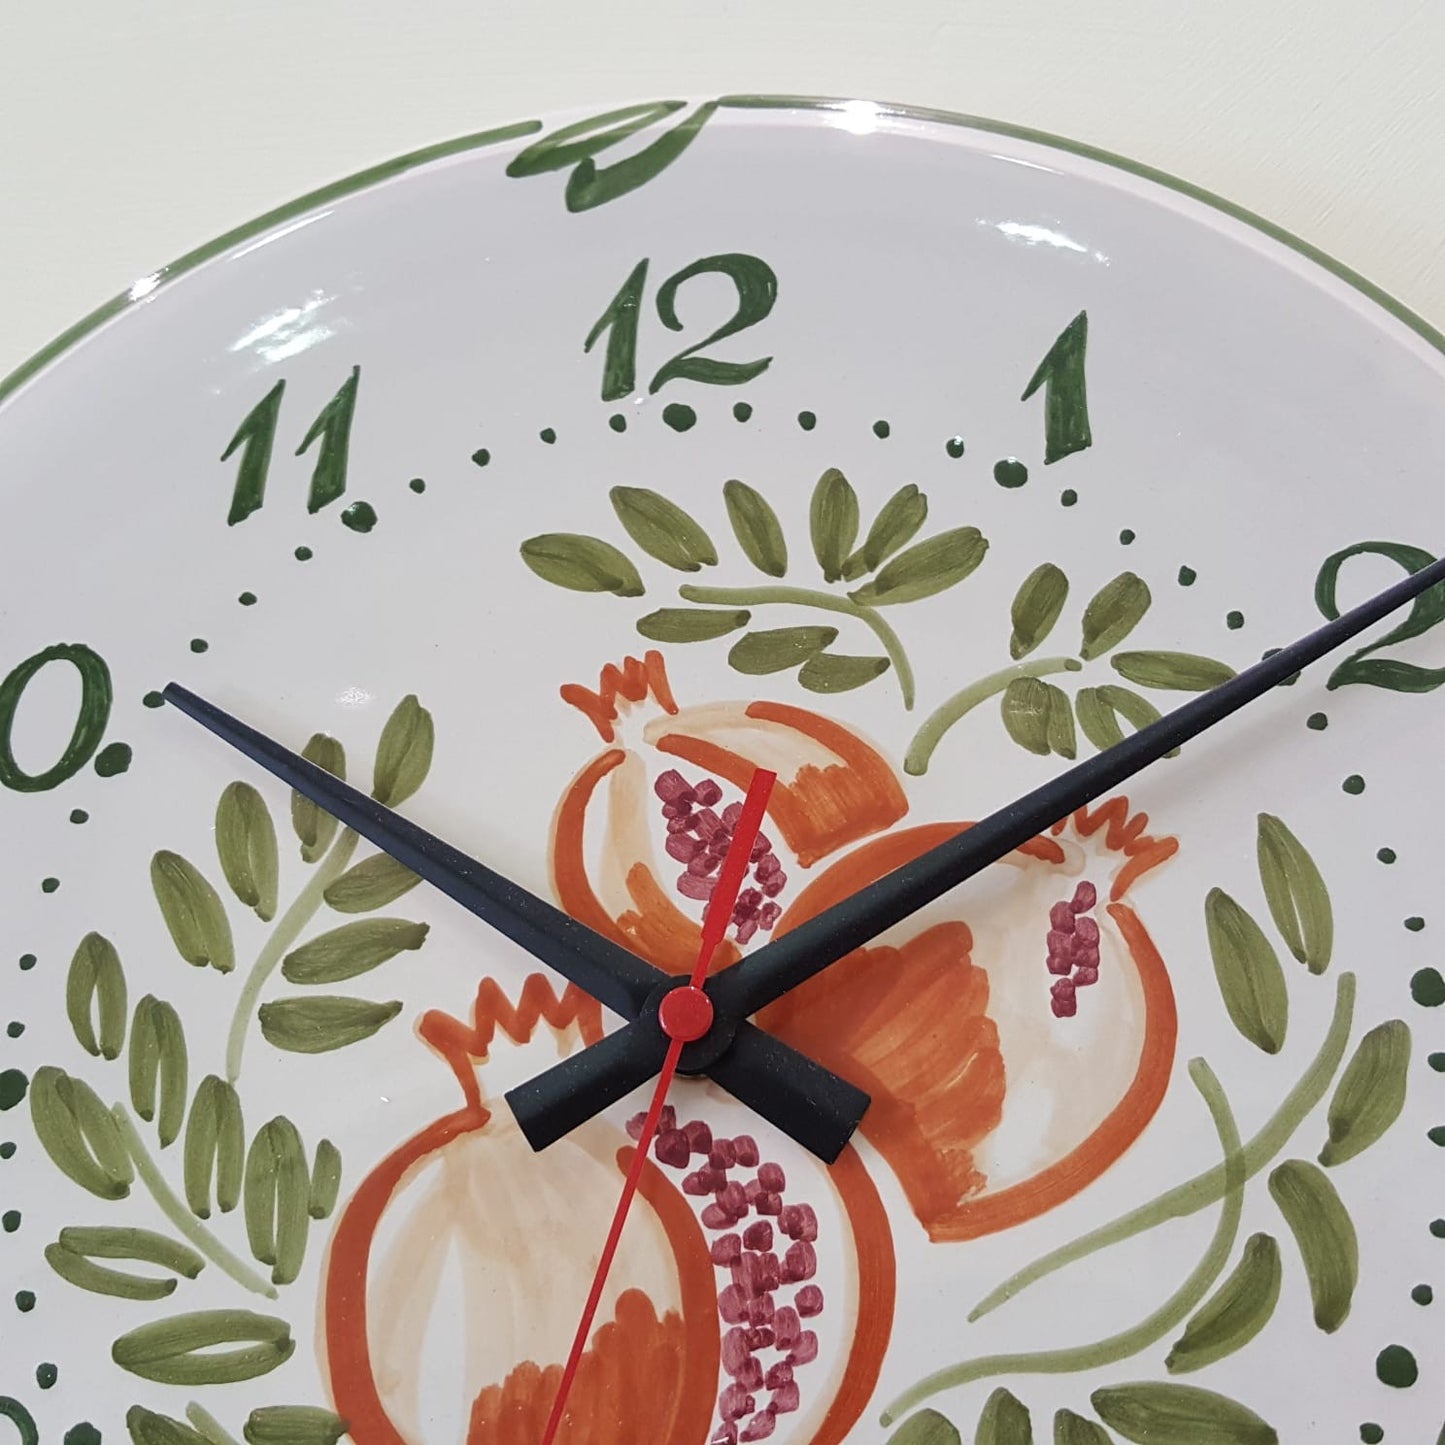 Ceramic clock to hang with Pomegranate decoration